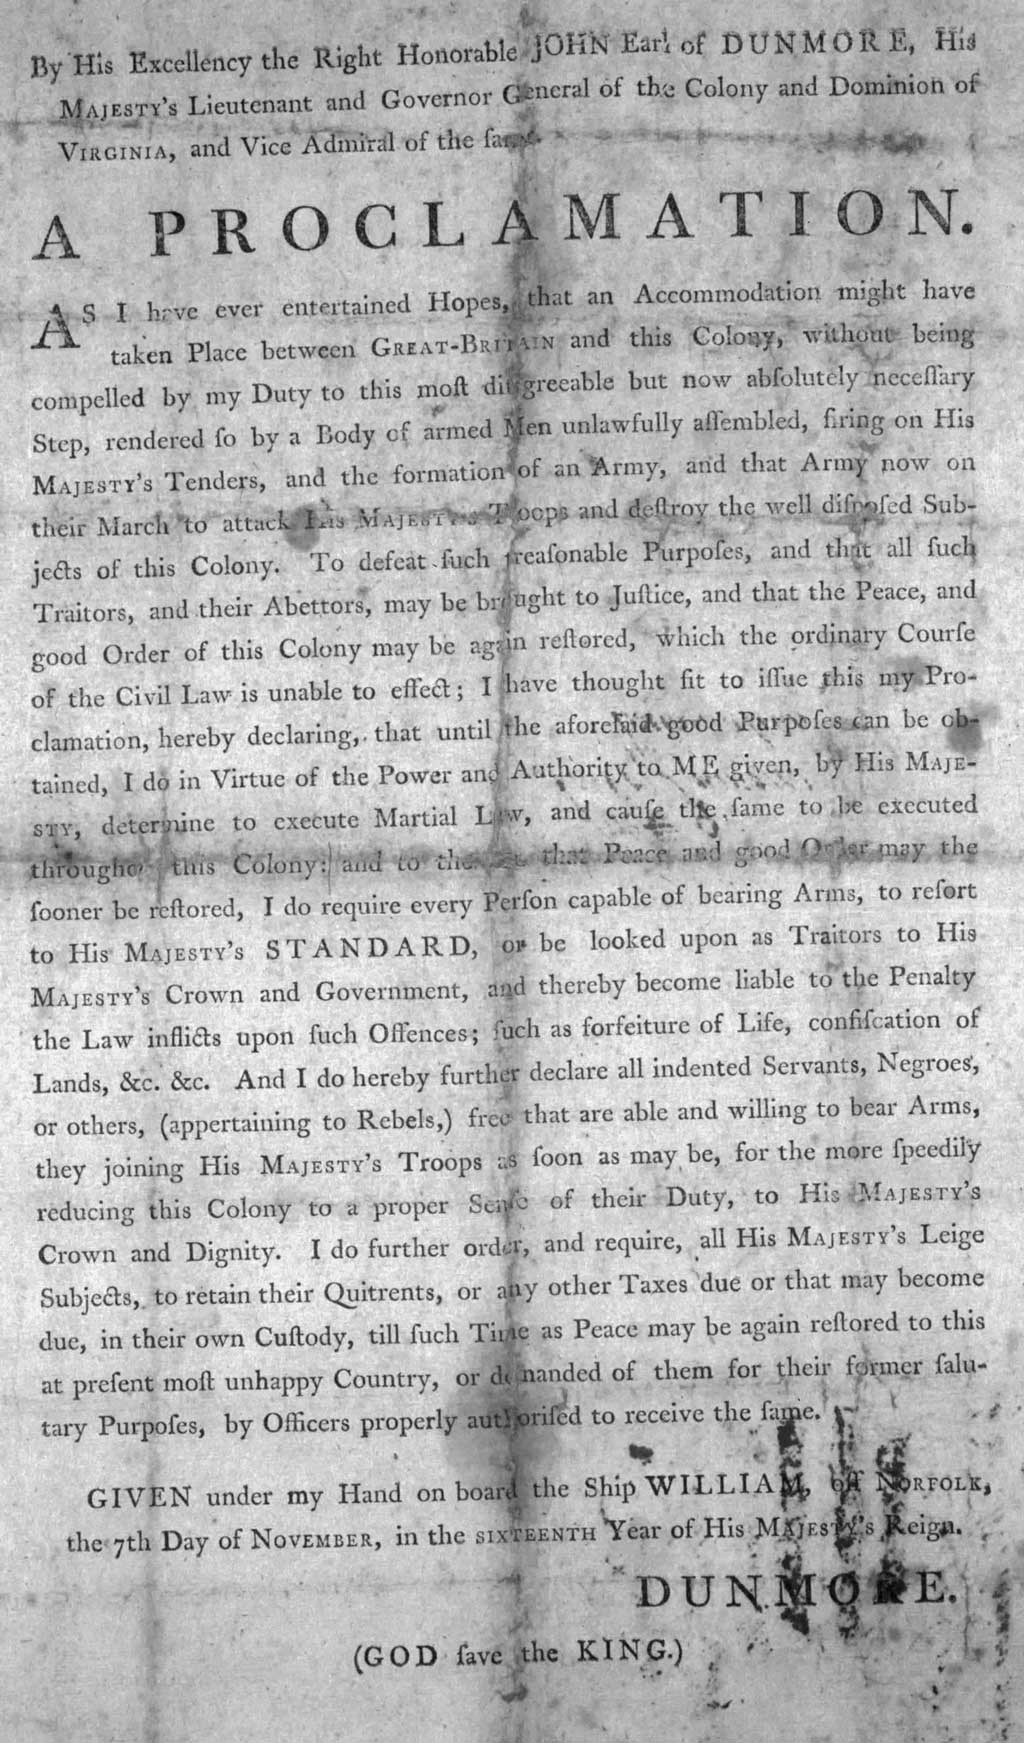 A copy of Dunmore's Proclamation, issued November 7, 1775